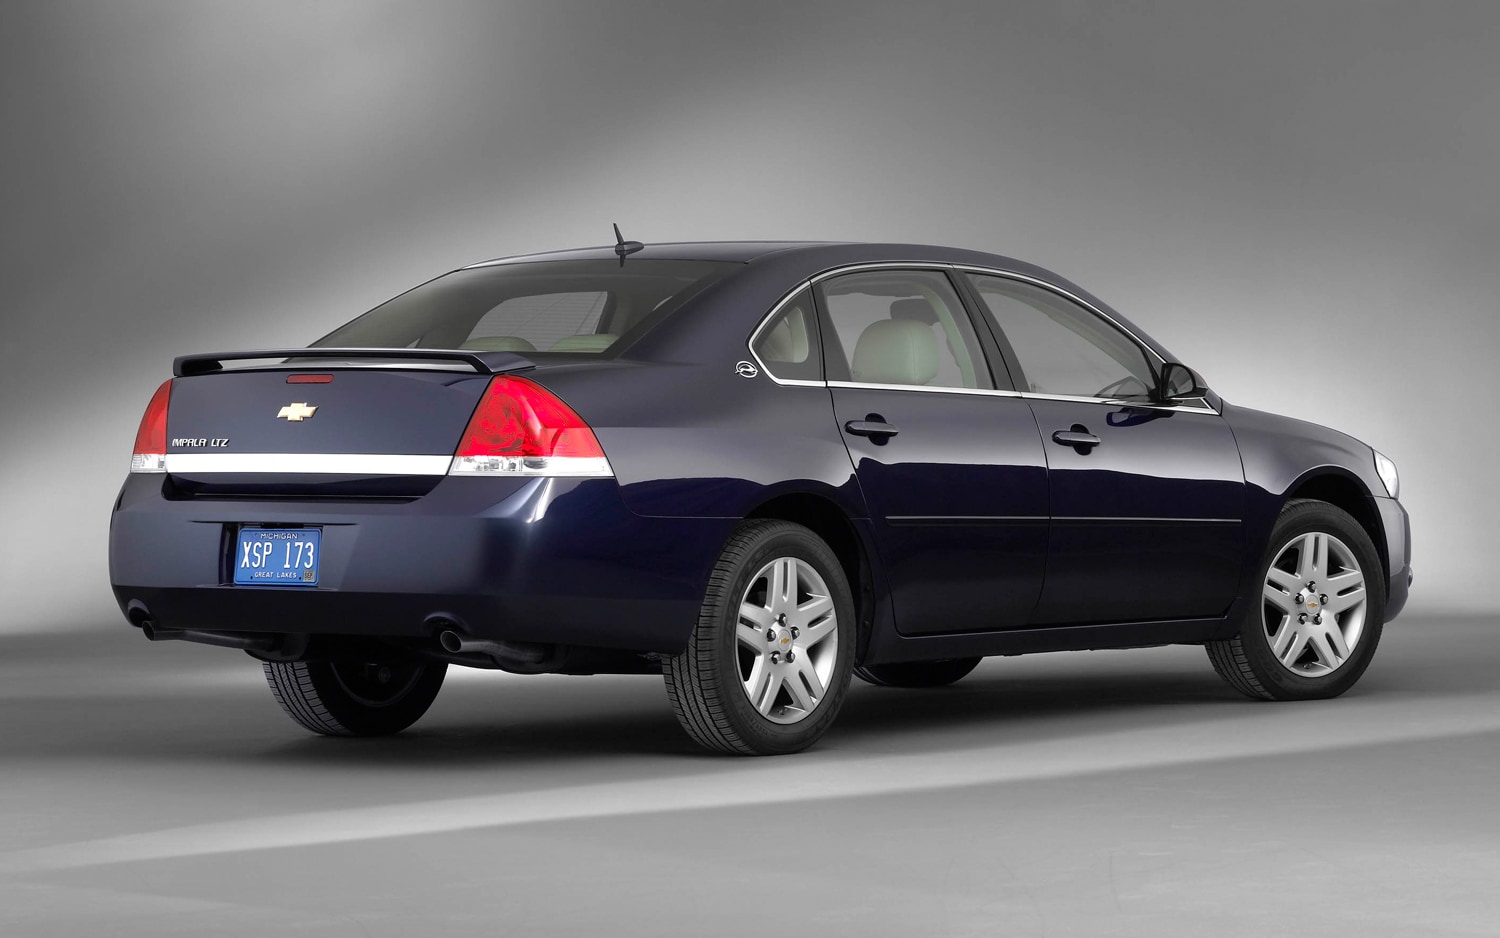 2007-2008 Chevrolet Impala Owners Suing GM Over Tire Wear